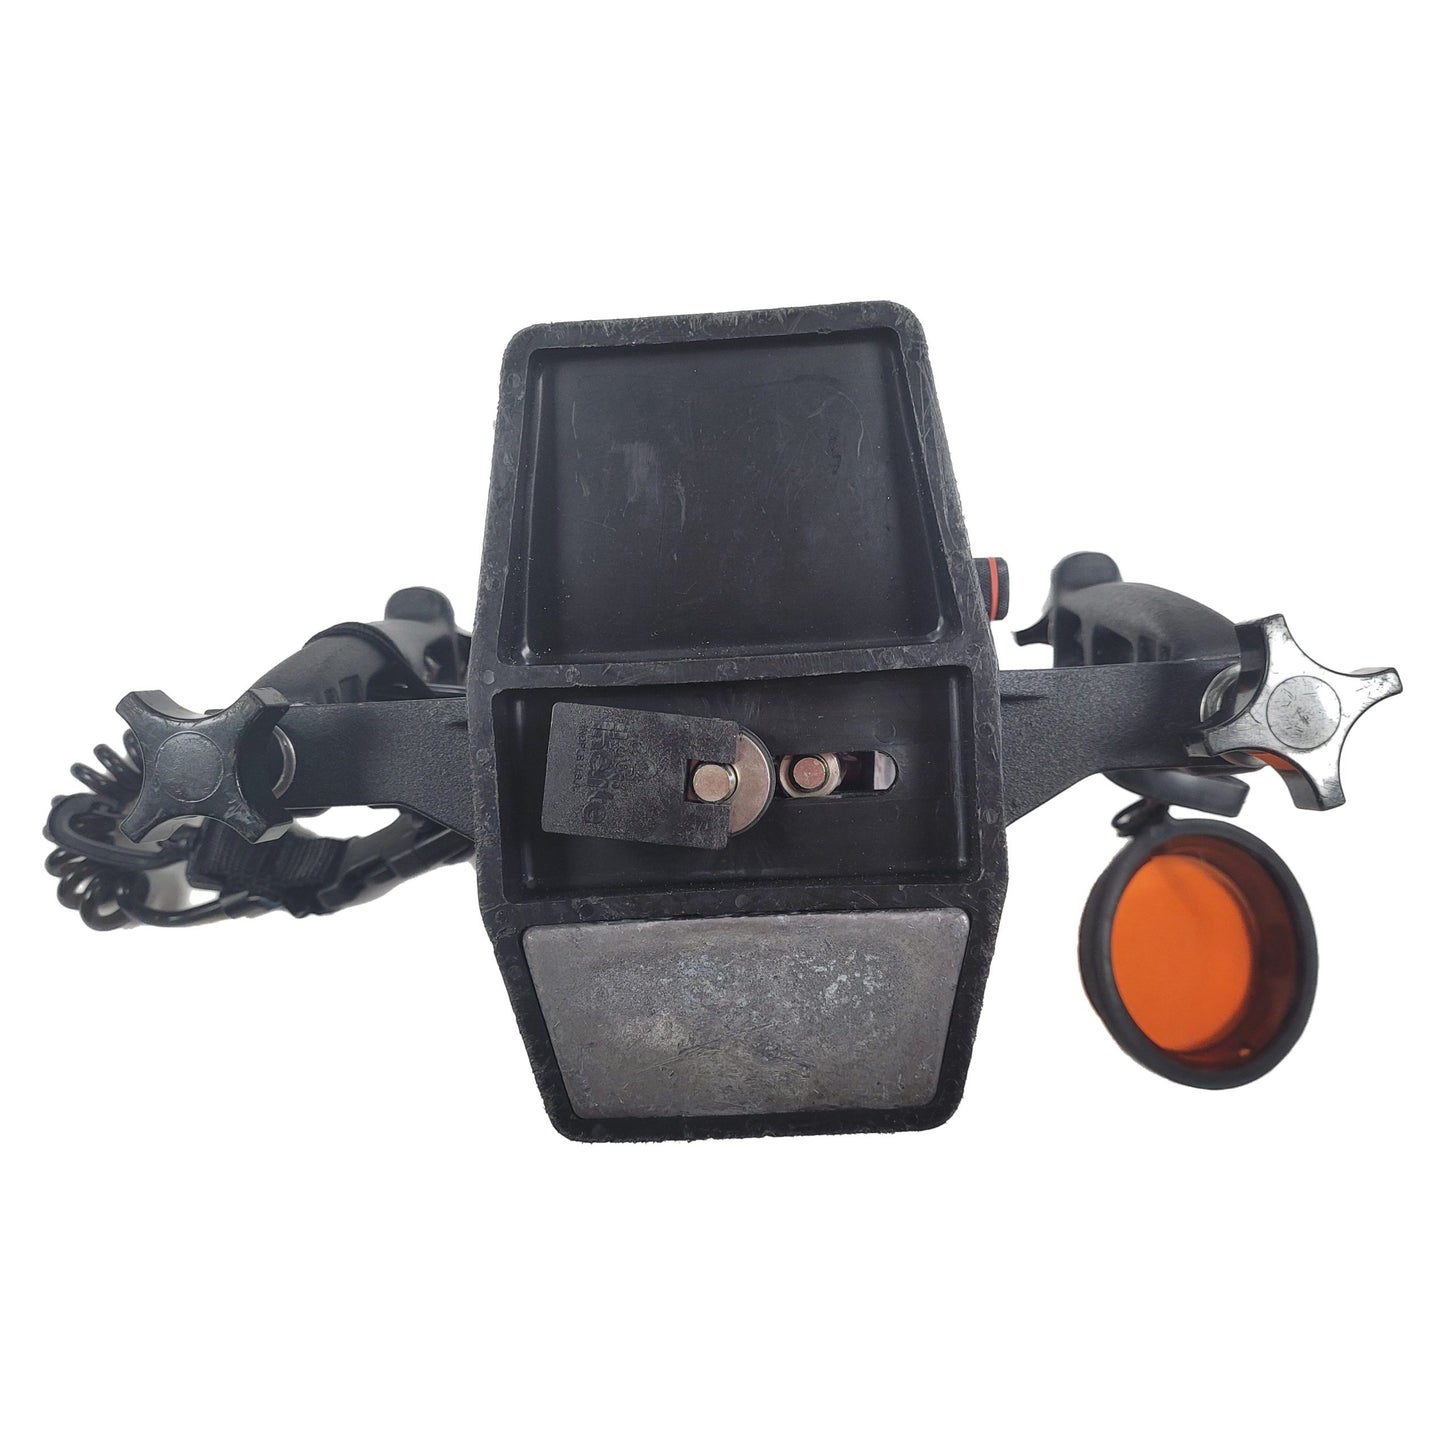 Ikelite 6038.25 Underwater Housing for Sony DCR-HC94 and DCR-HC96 Camcorders